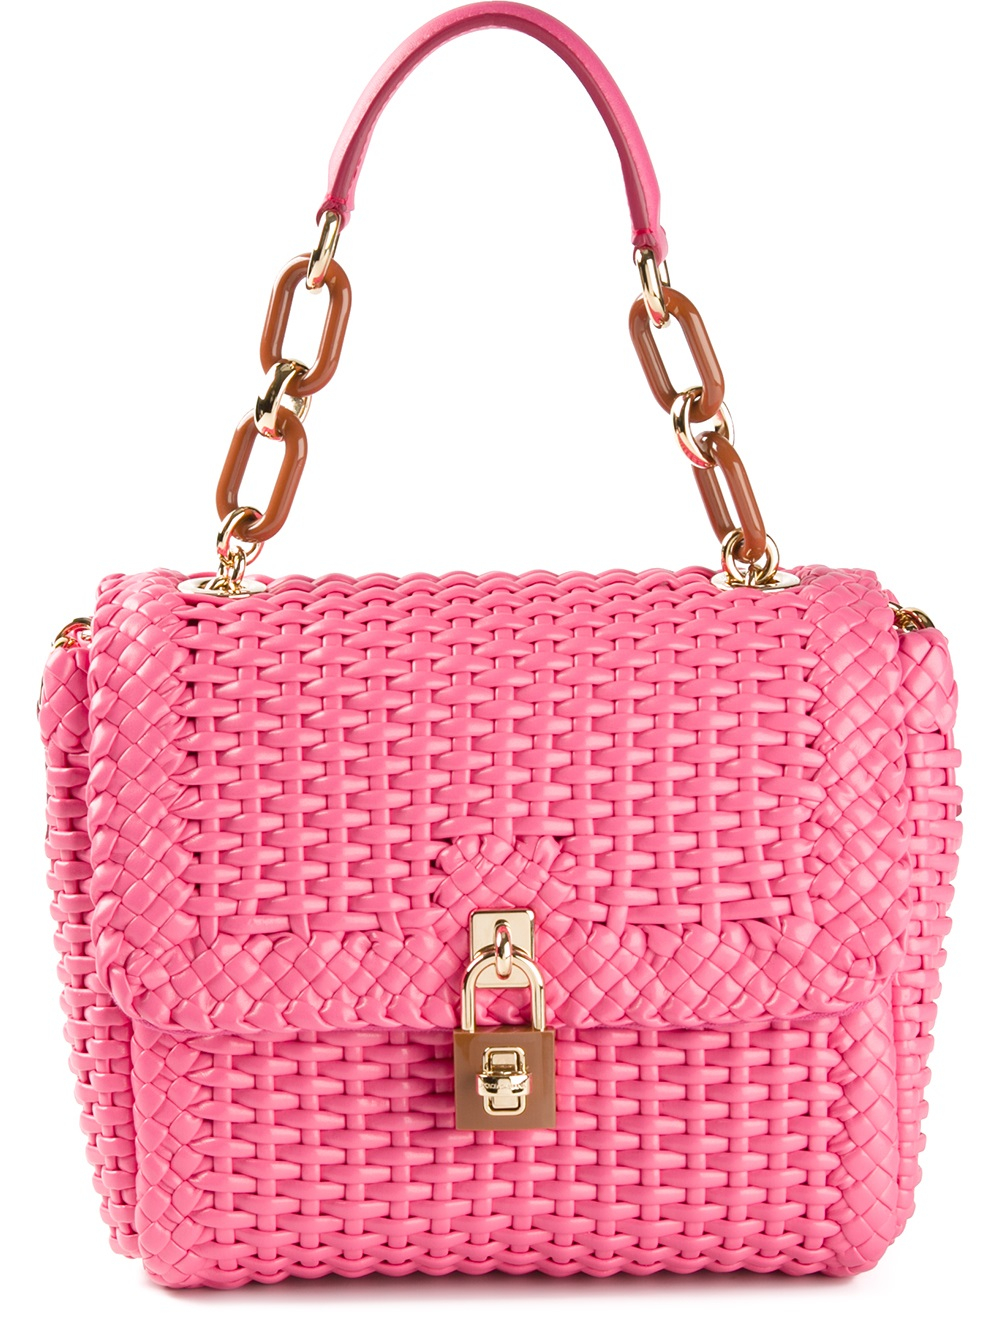 Dolce & Gabbana Woven Tote Bag in Pink & Purple (Pink) - Lyst